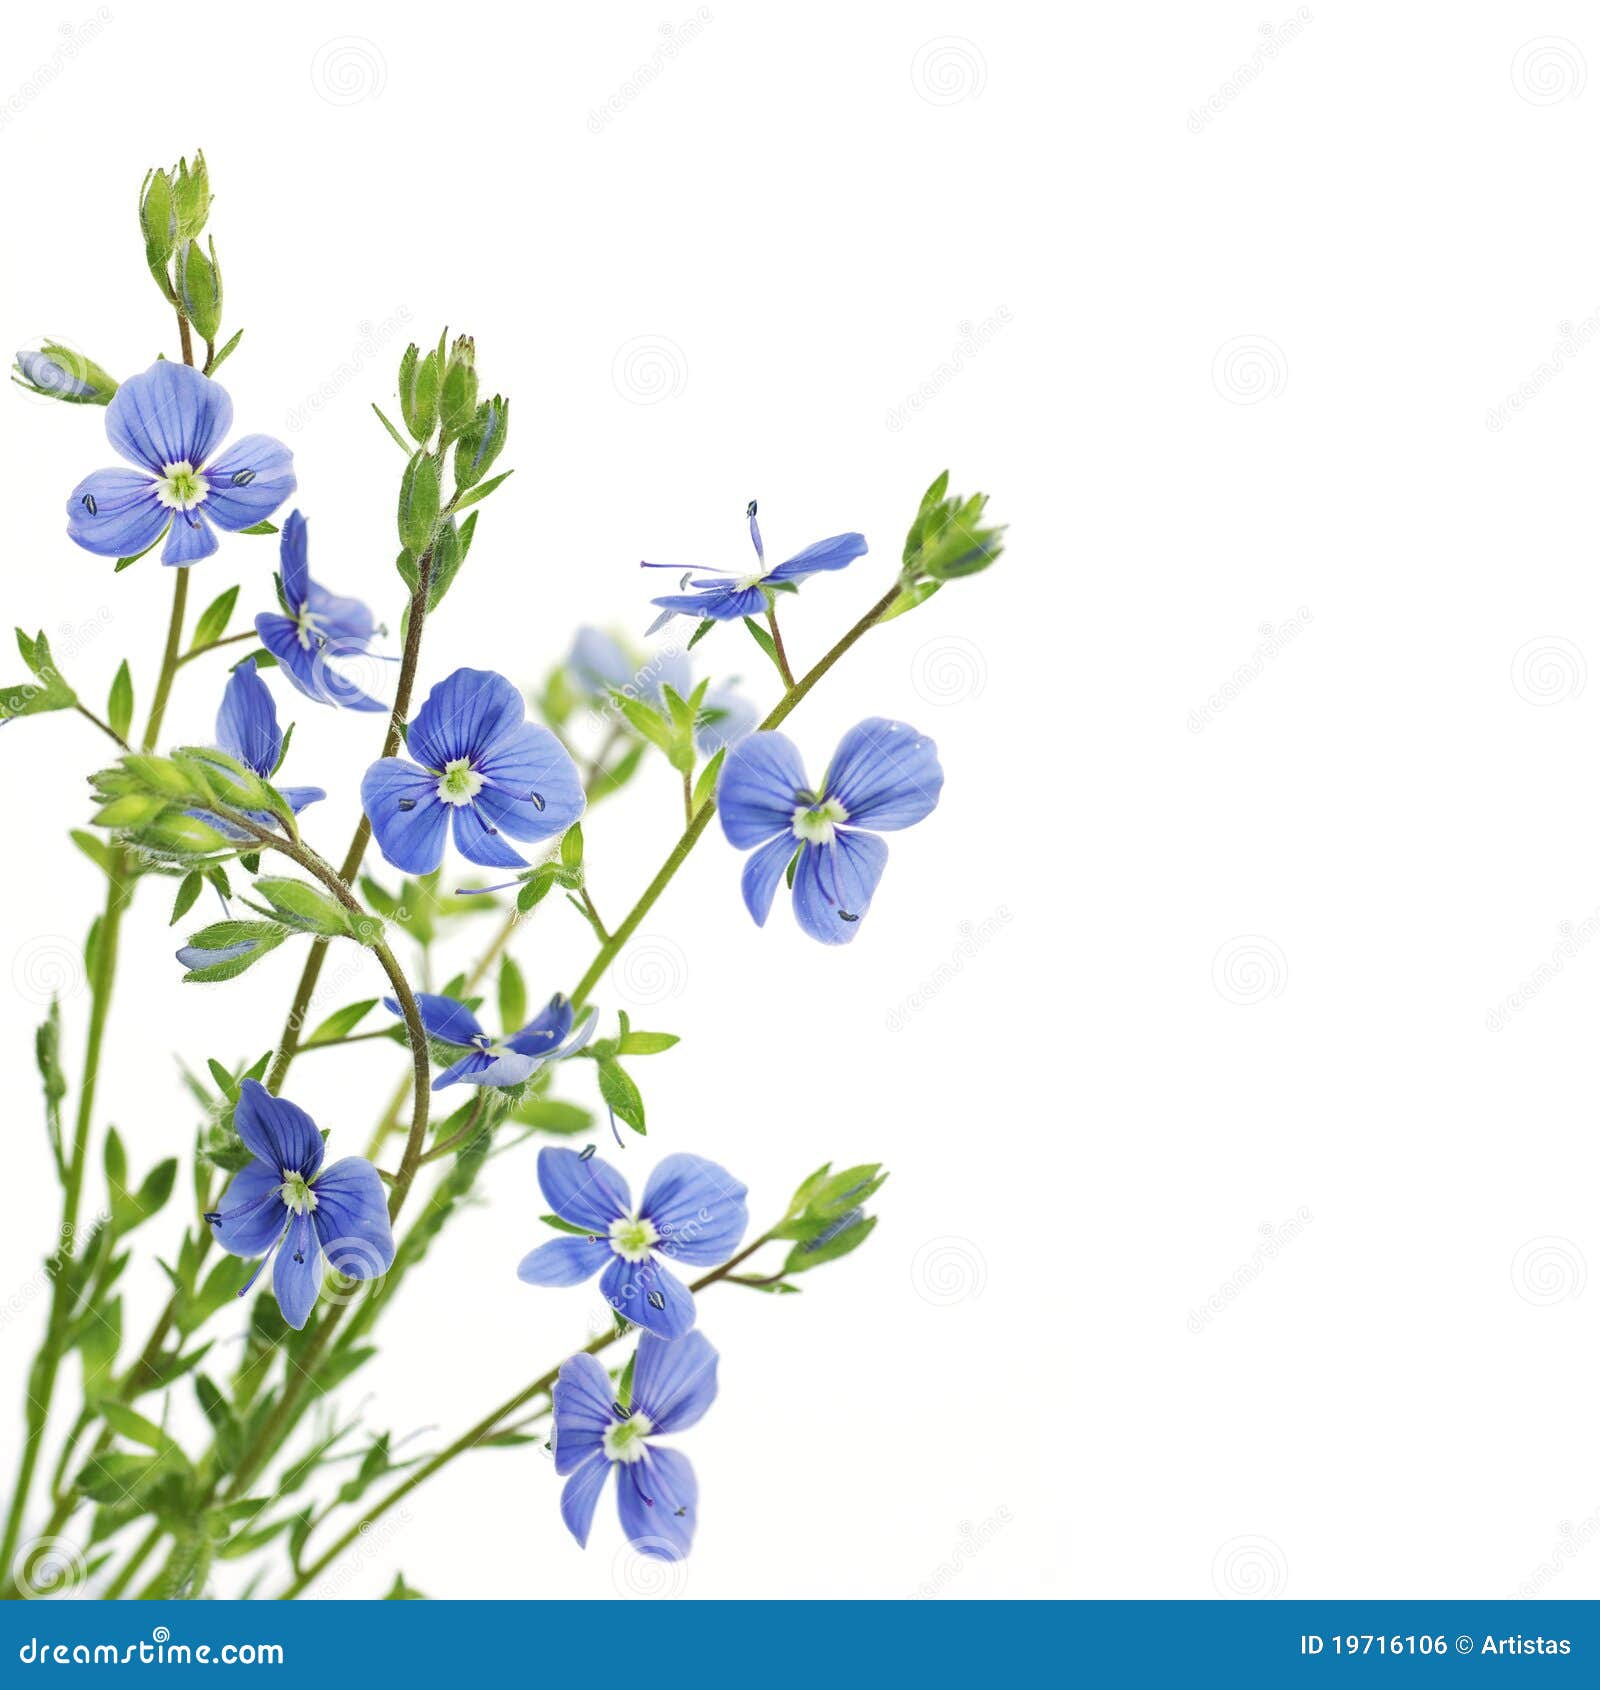 Blue Flower On A White Background Royalty Free Stock Image - Image: 19716106